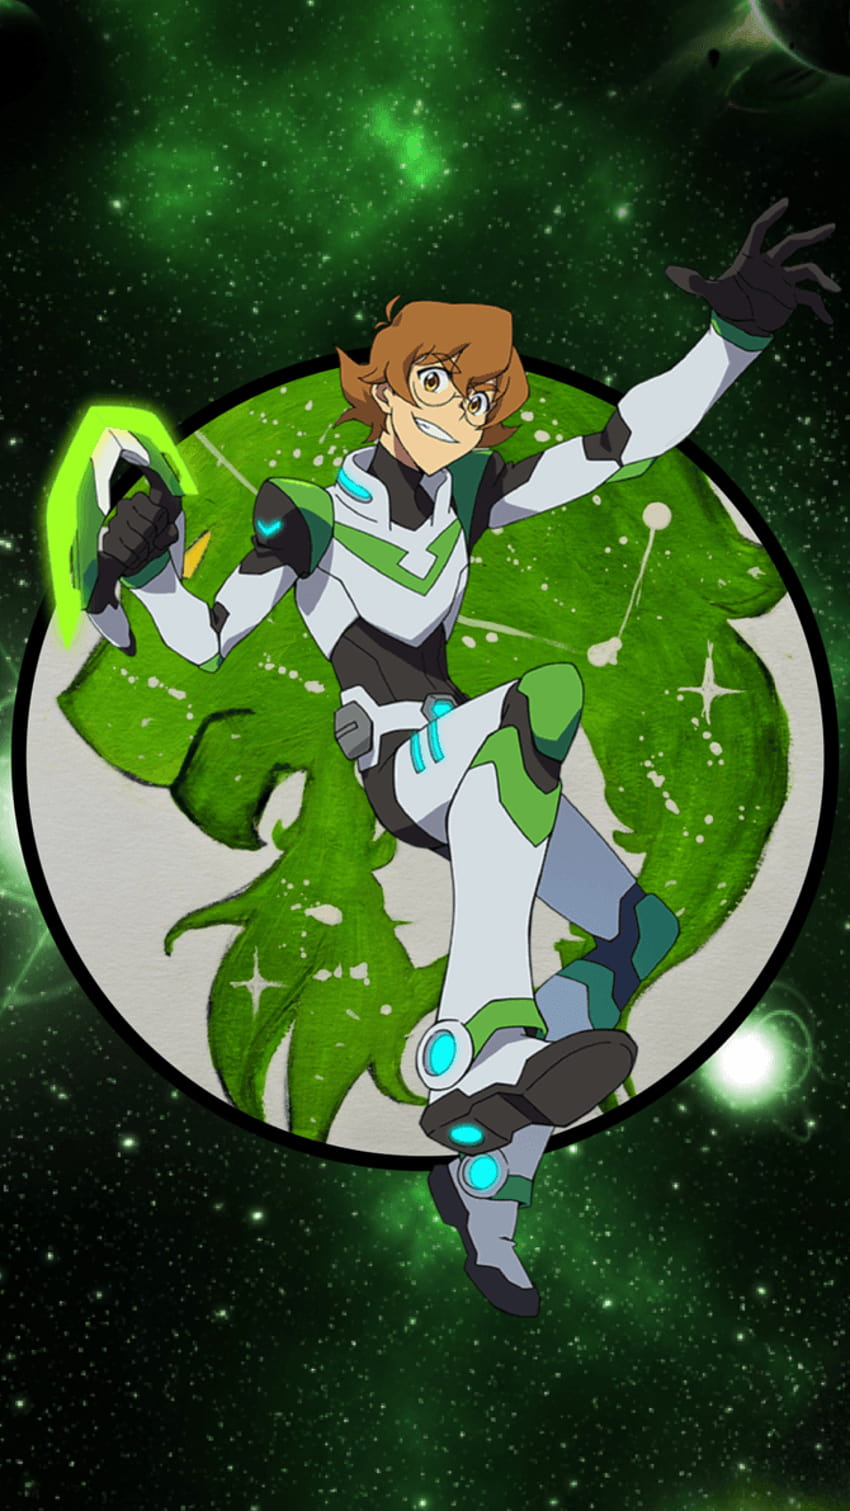 Pidge the Green Paladin of the Green Lion of Voltron from Voltron, voltron legendary defender phone HD phone wallpaper